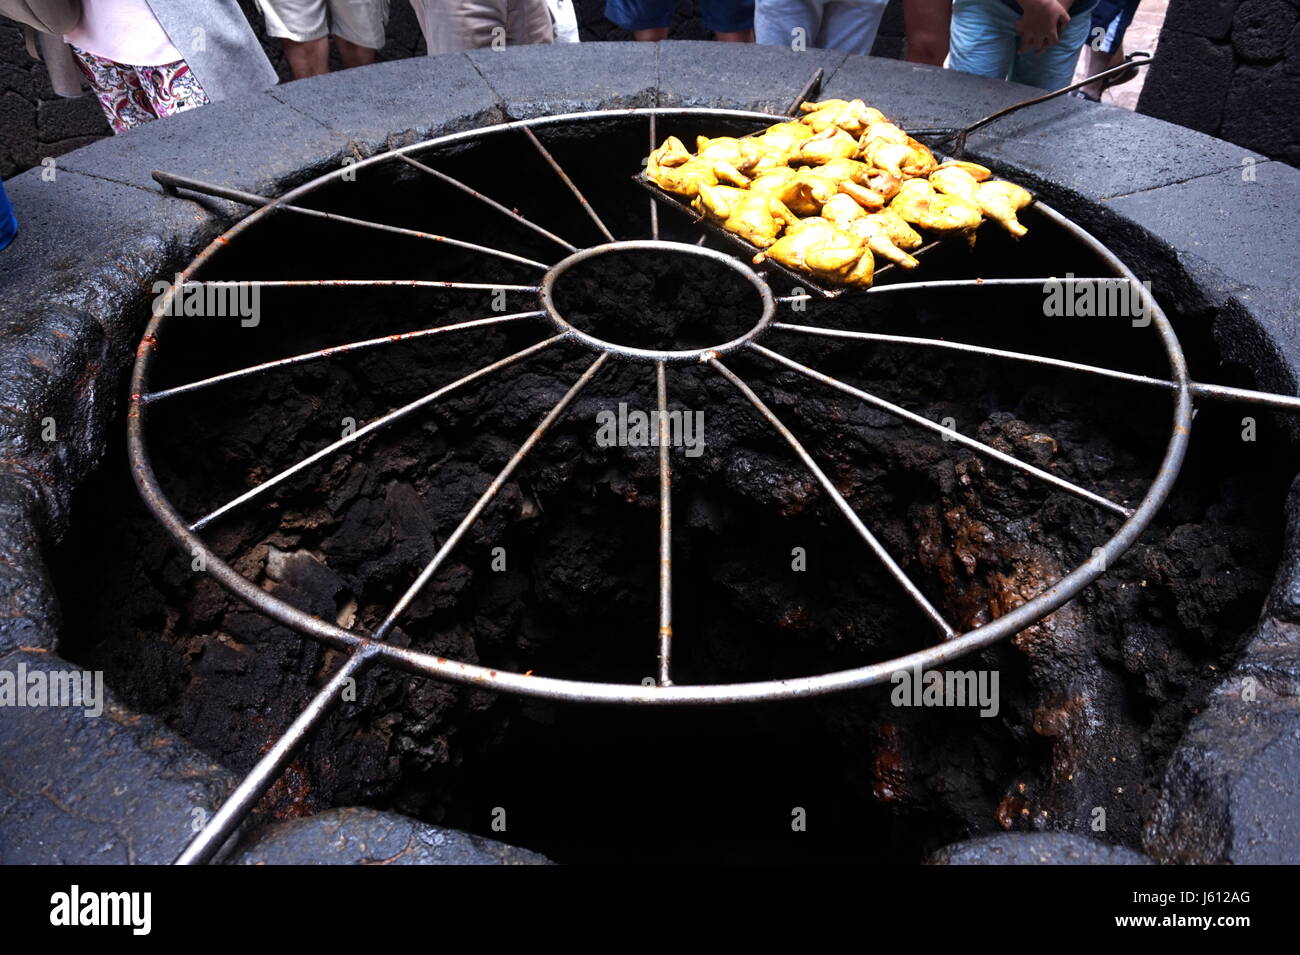 El Diablo Restaurant cooking food using heat from the ground in the volcanic active area of Timanfaya National Park, Lanzarote, Canary Islands, Spain Stock Photo